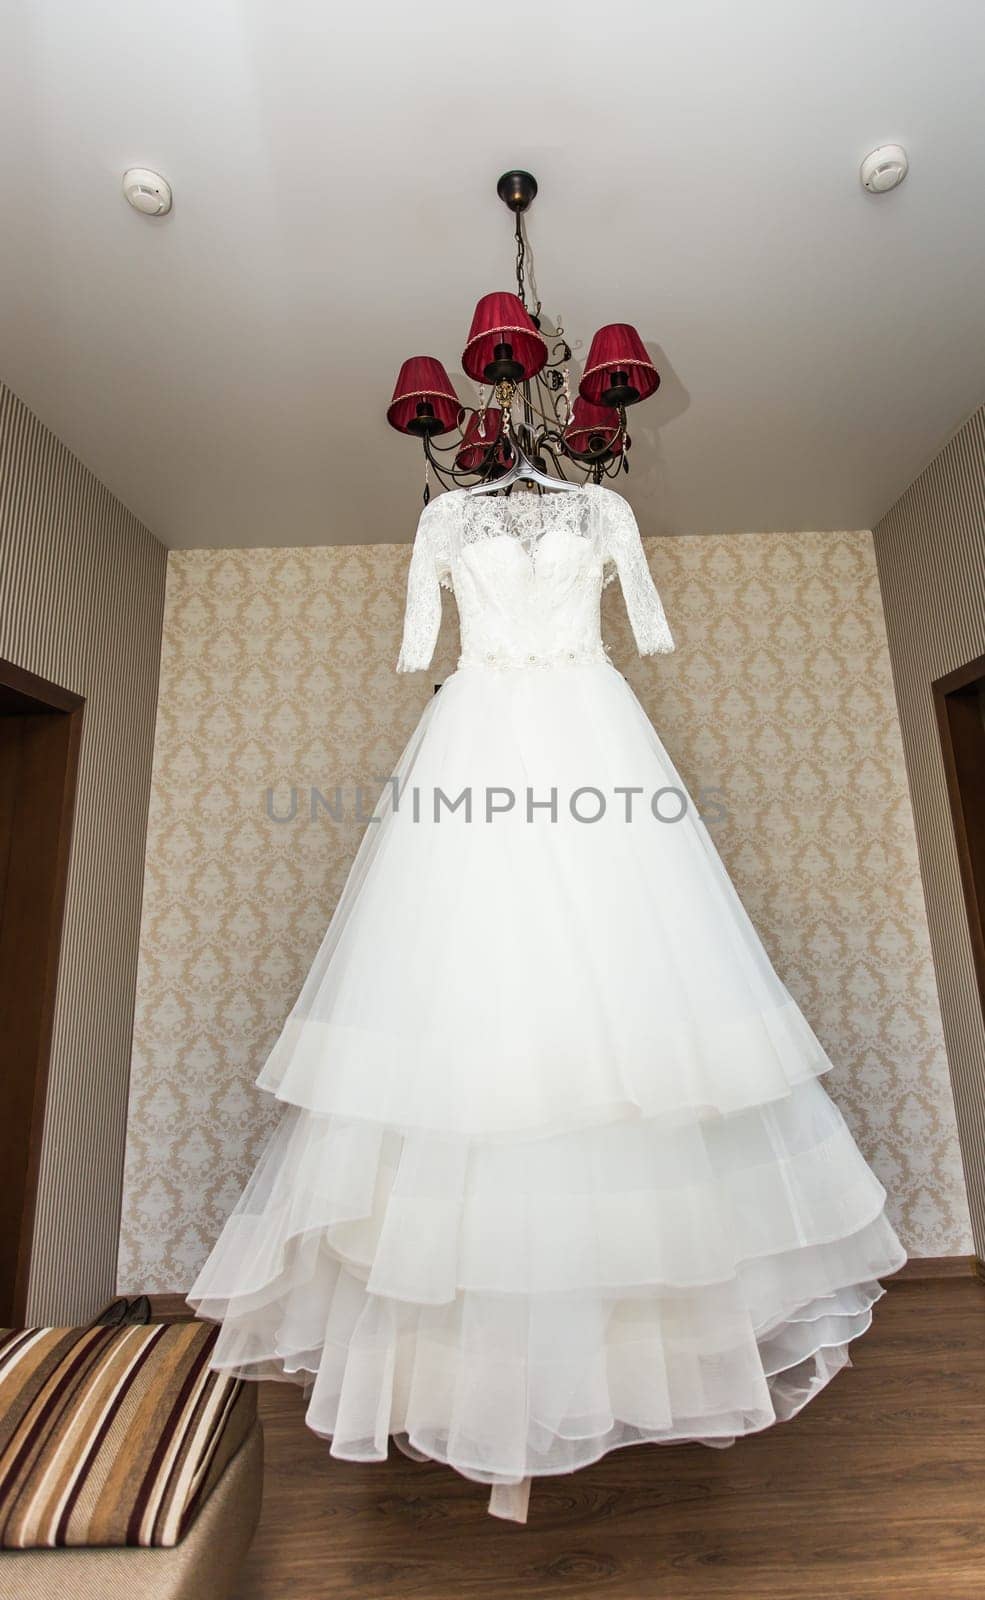 The perfect wedding dress on a hanger in room of bride by Satura86